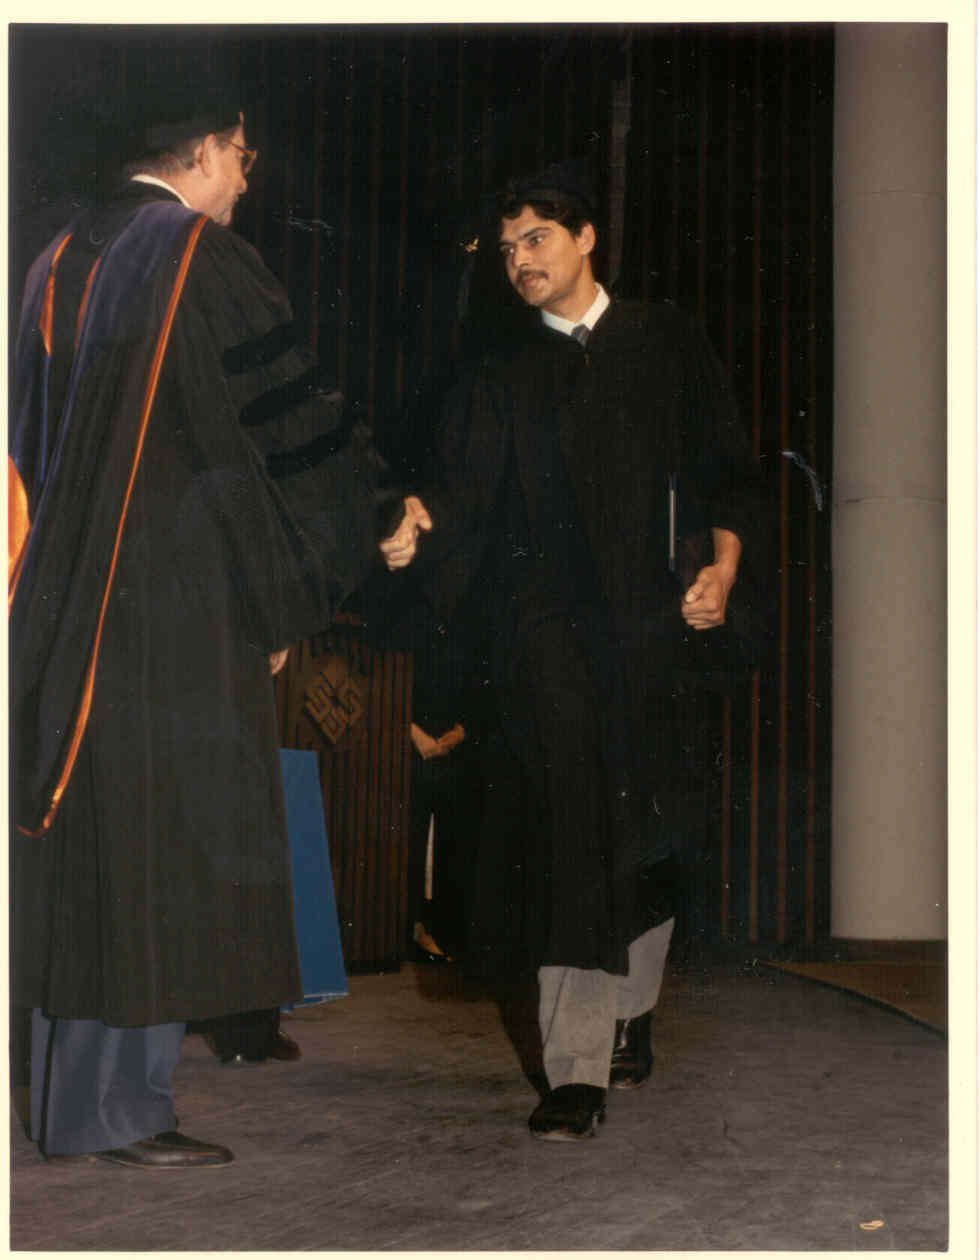 Click to enlarge - Myself at 29 yrs - during graduation ceremony in 1987, when I received my Ist Bachelors degree in Computer Science 